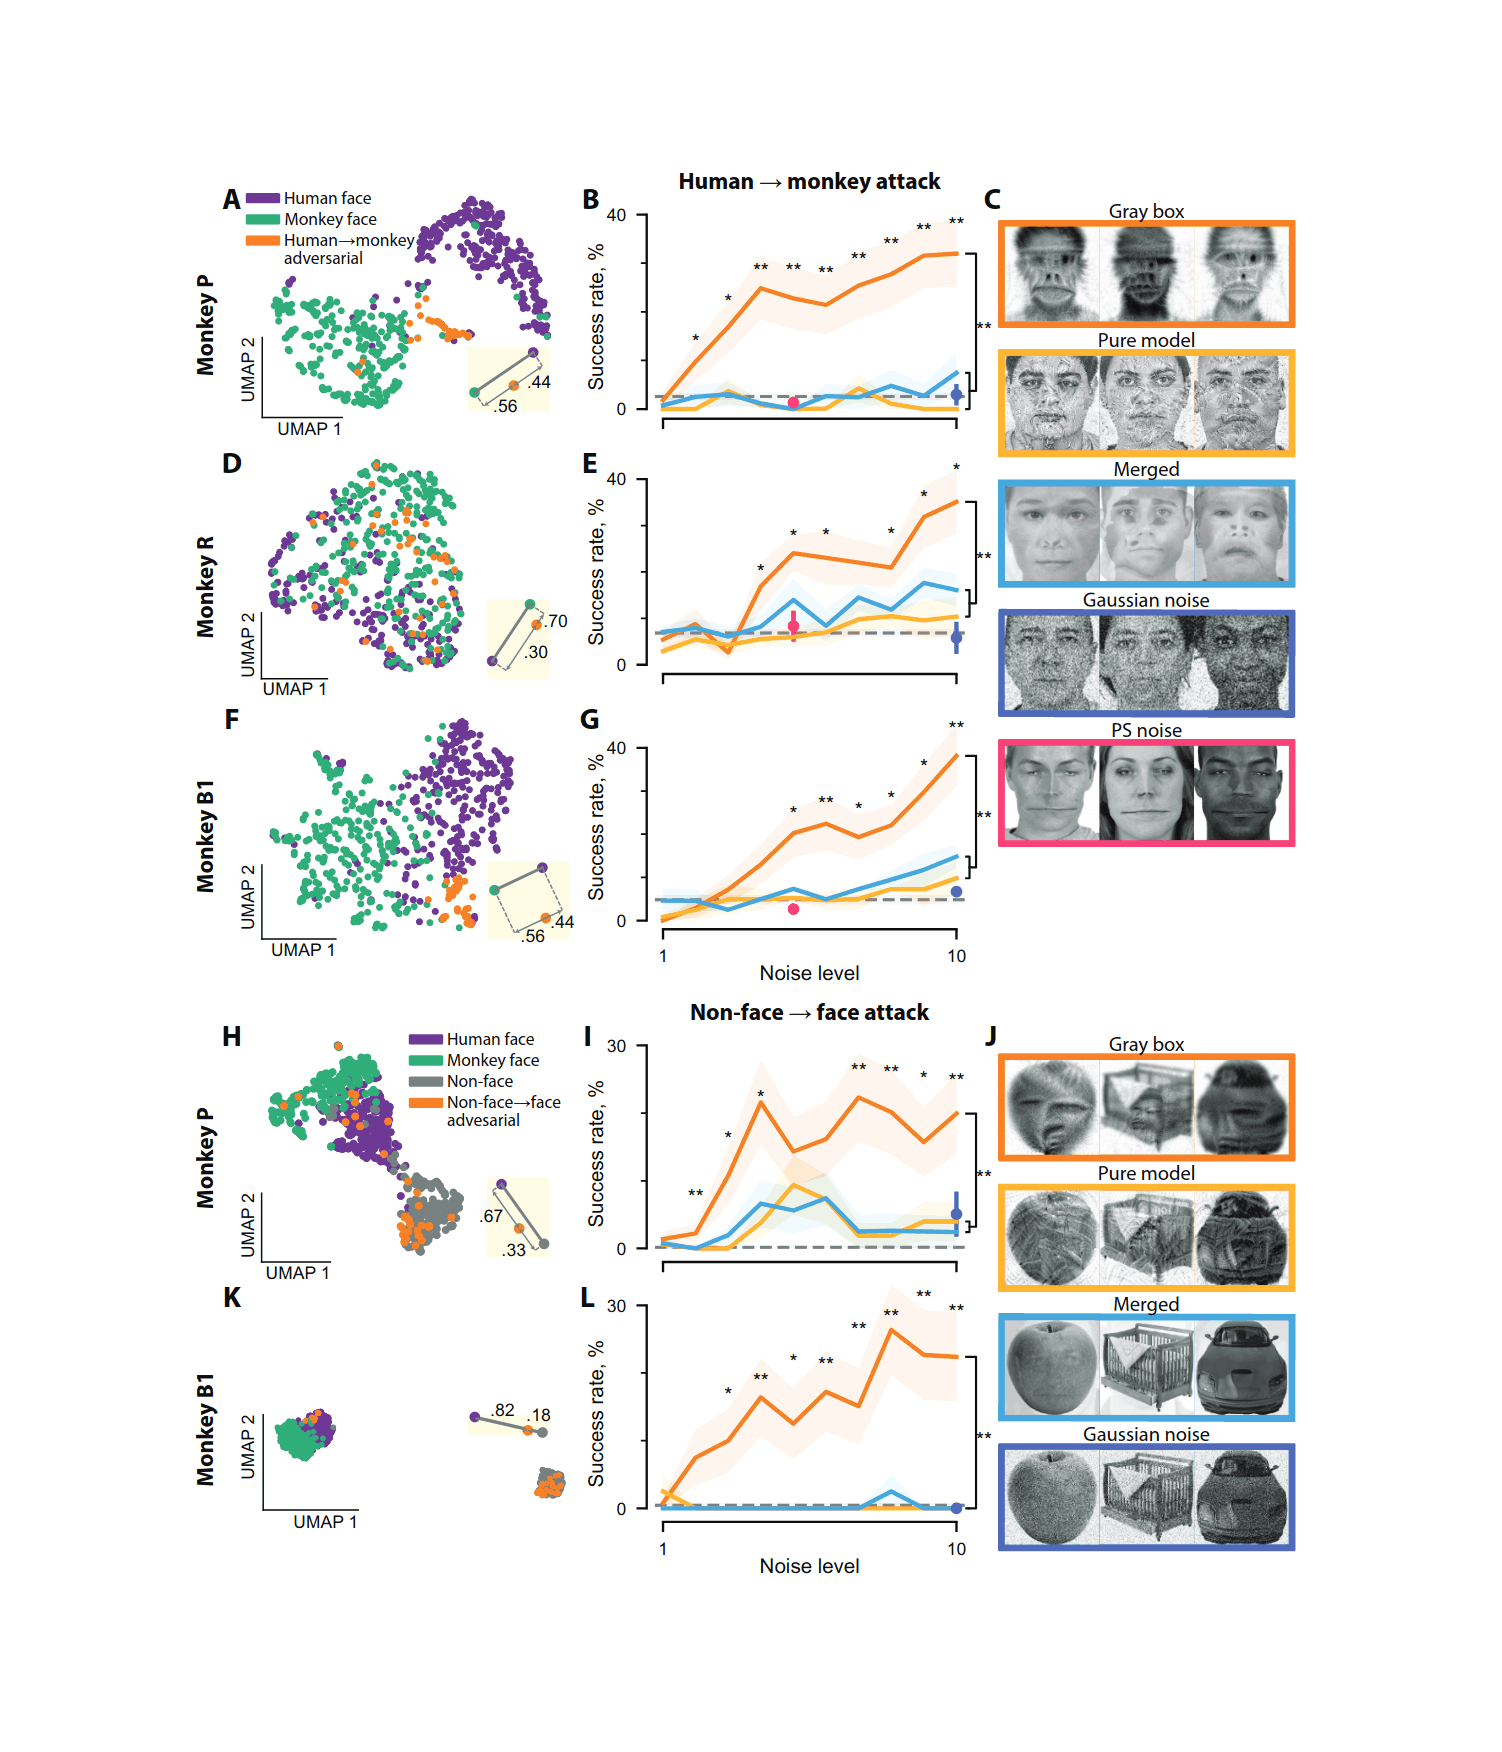 Figure 2: Neuron-level results of adversarial attack. (A–G), Human → monkey attack. (A) UMAP visualization of neuronal representation of images in monkey P. ‘Gray box attack human face’ corresponds to noise level 10. Inset shows average distances from adversarial images to clean human faces and clean monkey faces, along the direction that best separates the latter 2 and normalized to the distance between them. Points in inset show centers of mass of UMAP points for illustration only, and do not correspond to the distance quantification. (B) Success rates of attack and control images (pure model, merged, Gaussian noise, and PS noise images) at different noise levels. Legend and example images are in (C). Shading and error bars show s.e.m. over bootstrap samples. *, p < 0.05 and ✱✱, p < 0.01. (D, E), Same as (A, B) for monkey R. (F, G), Same as (A, B) for monkey B1. (H–L), Same as (A–G) for non-face → face attack in monkeys P and B1.